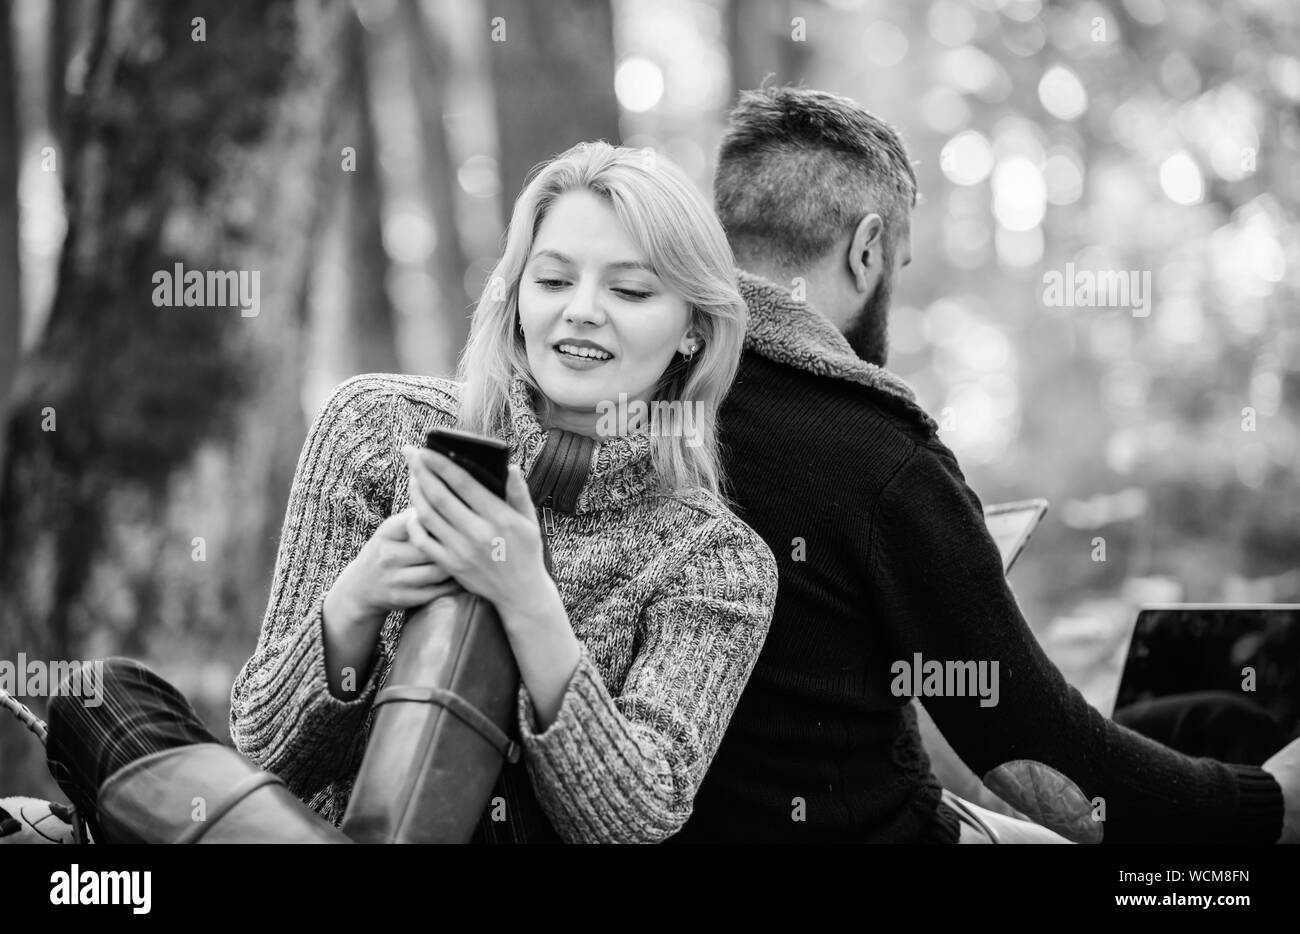 Modern people always involved online communication. Online life modern technology. Logout of all accounts. Modern life. Happy loving couple relaxing in park with mobile gadgets. Internet addiction. Stock Photo